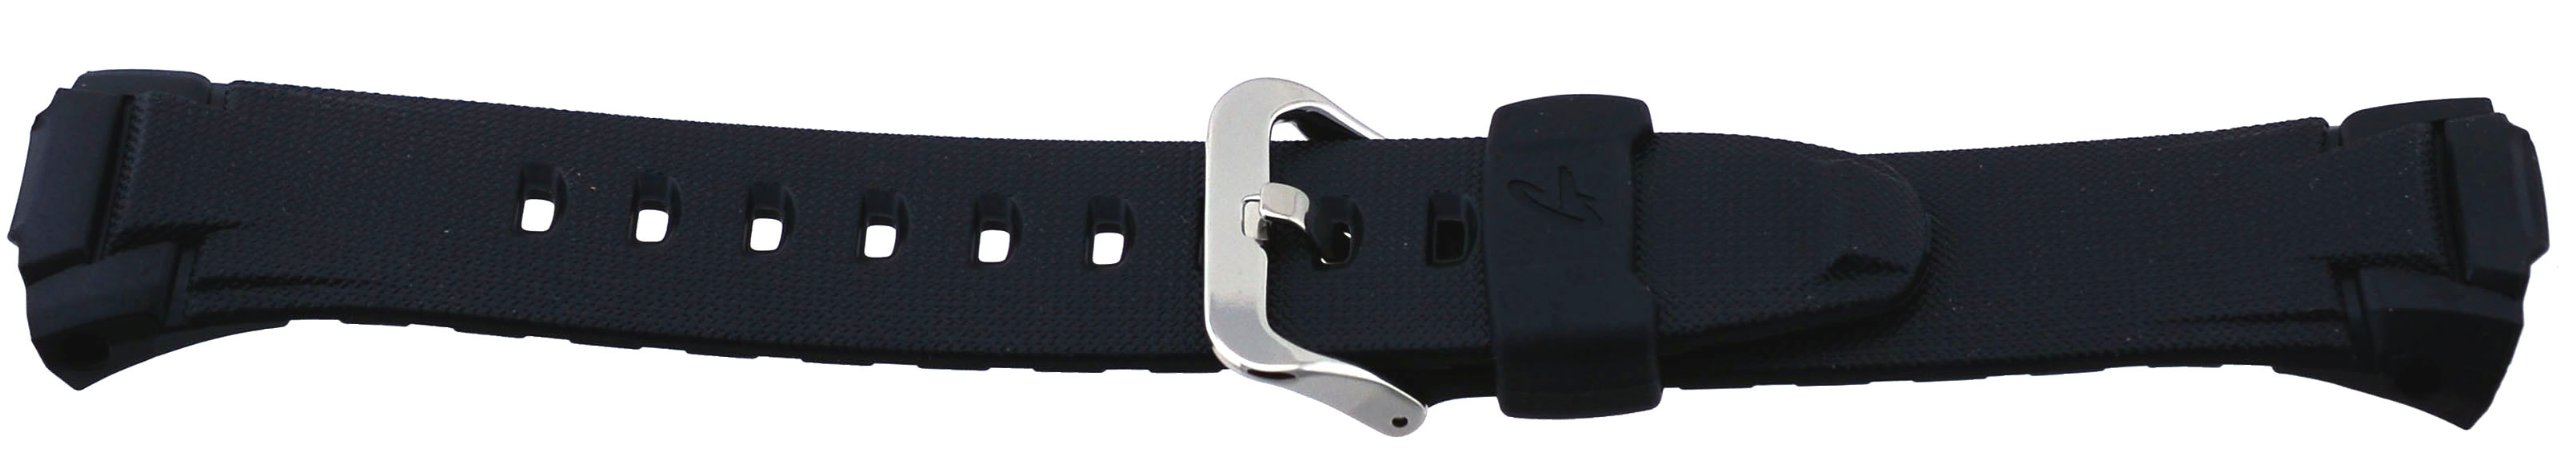 Casio Genuine Replacement Strap for G Shock Watch Model - GW-530 GW-500